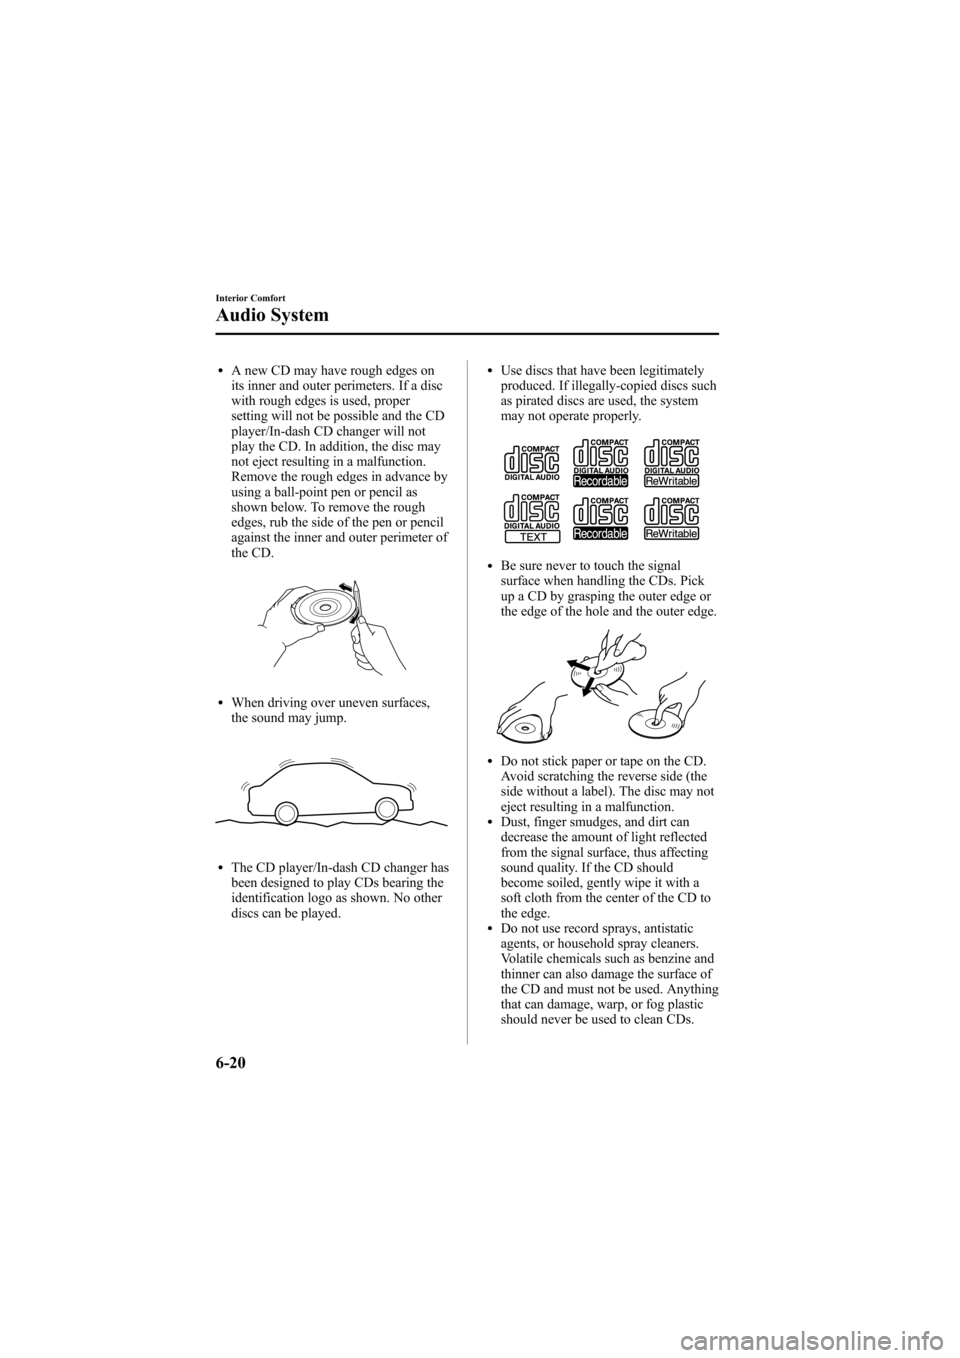 MAZDA MODEL 6 2009  Owners Manual (in English) Black plate (238,1)
lA new CD may have rough edges on
its inner and outer perimeters. If a disc
with rough edges is used, proper
setting will not be possible and the CD
player/In-dash CD changer will 